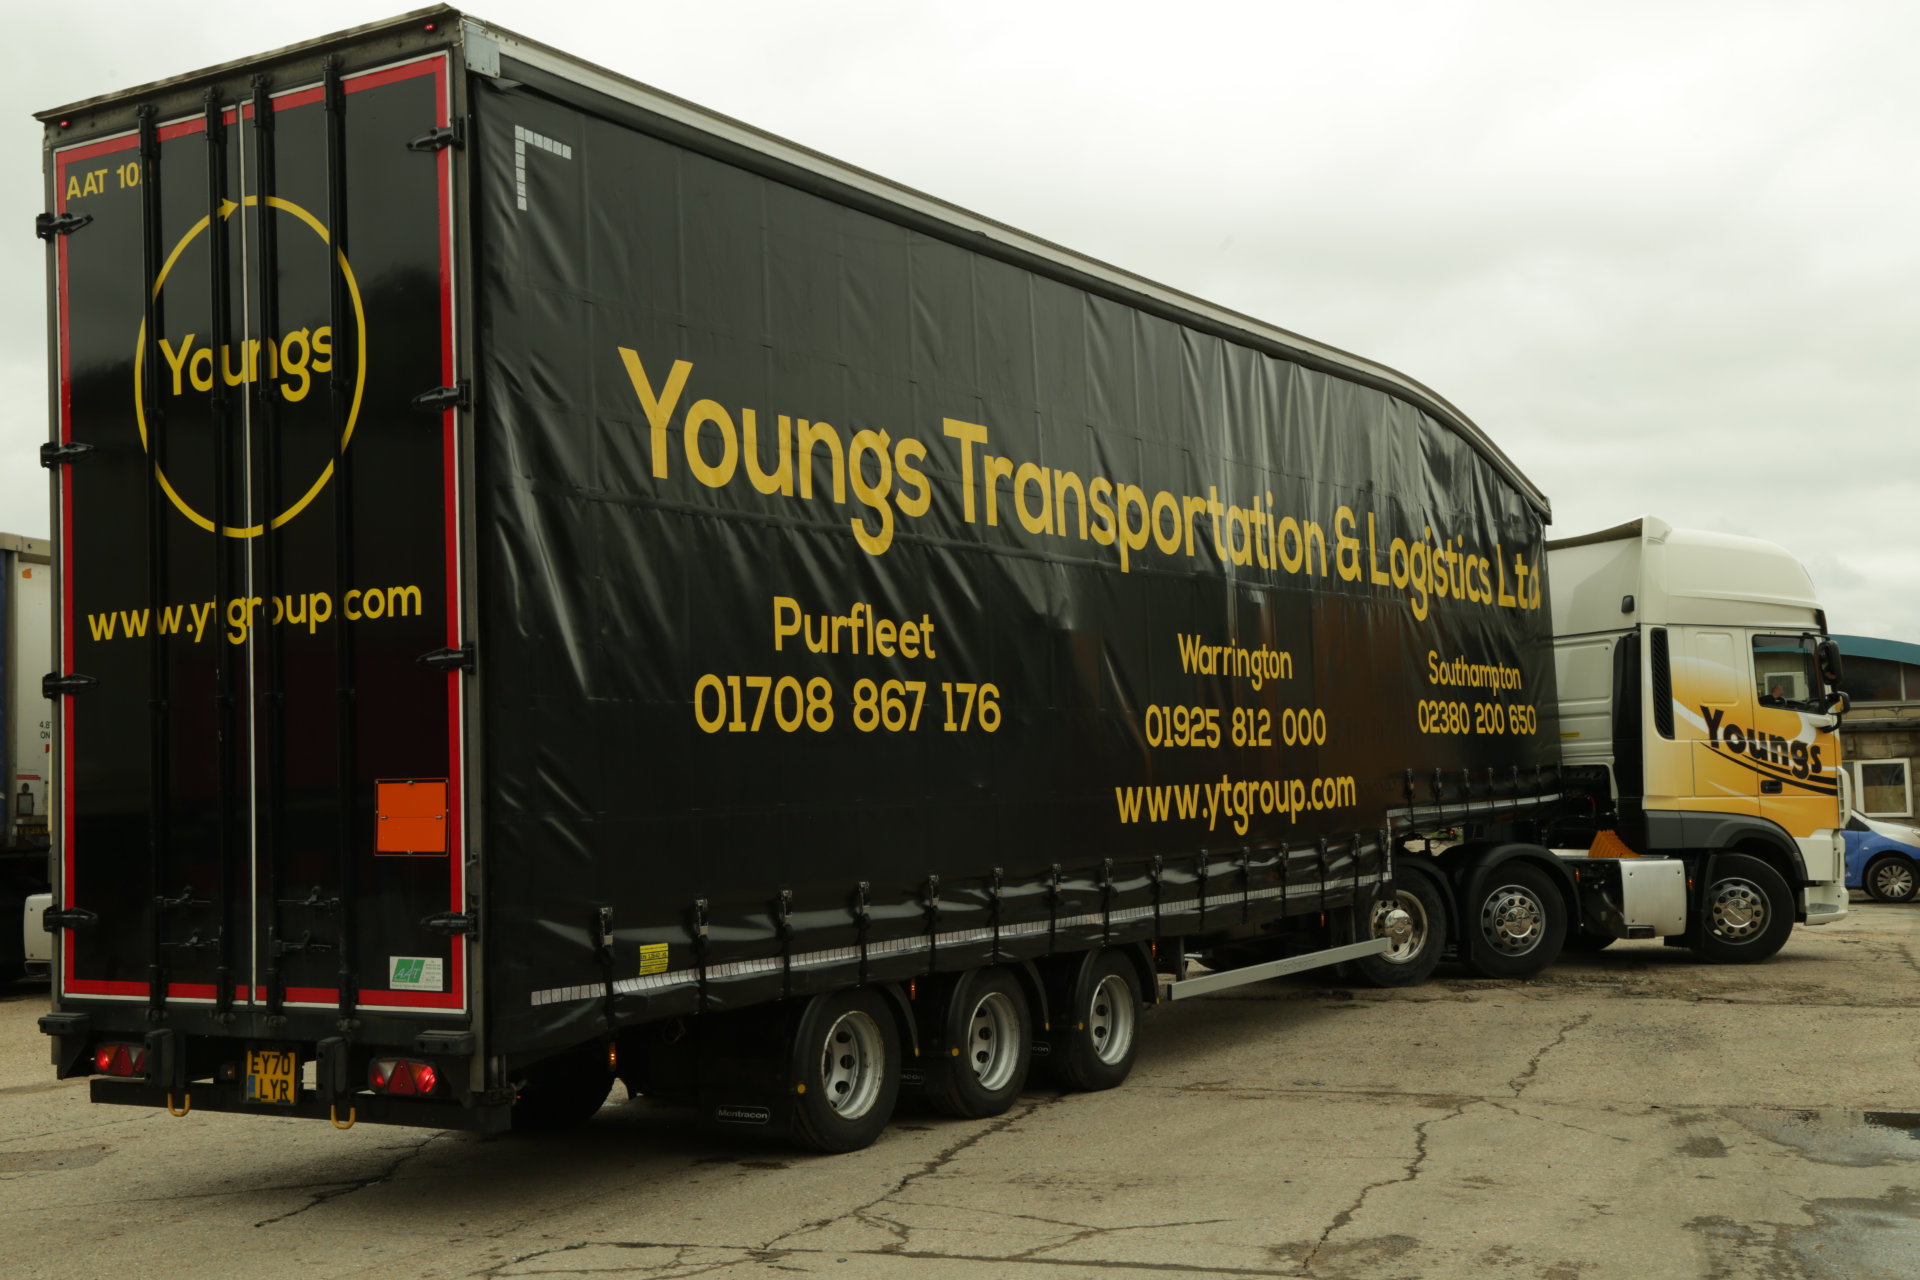 Contact - Youngs Transport & Logistics